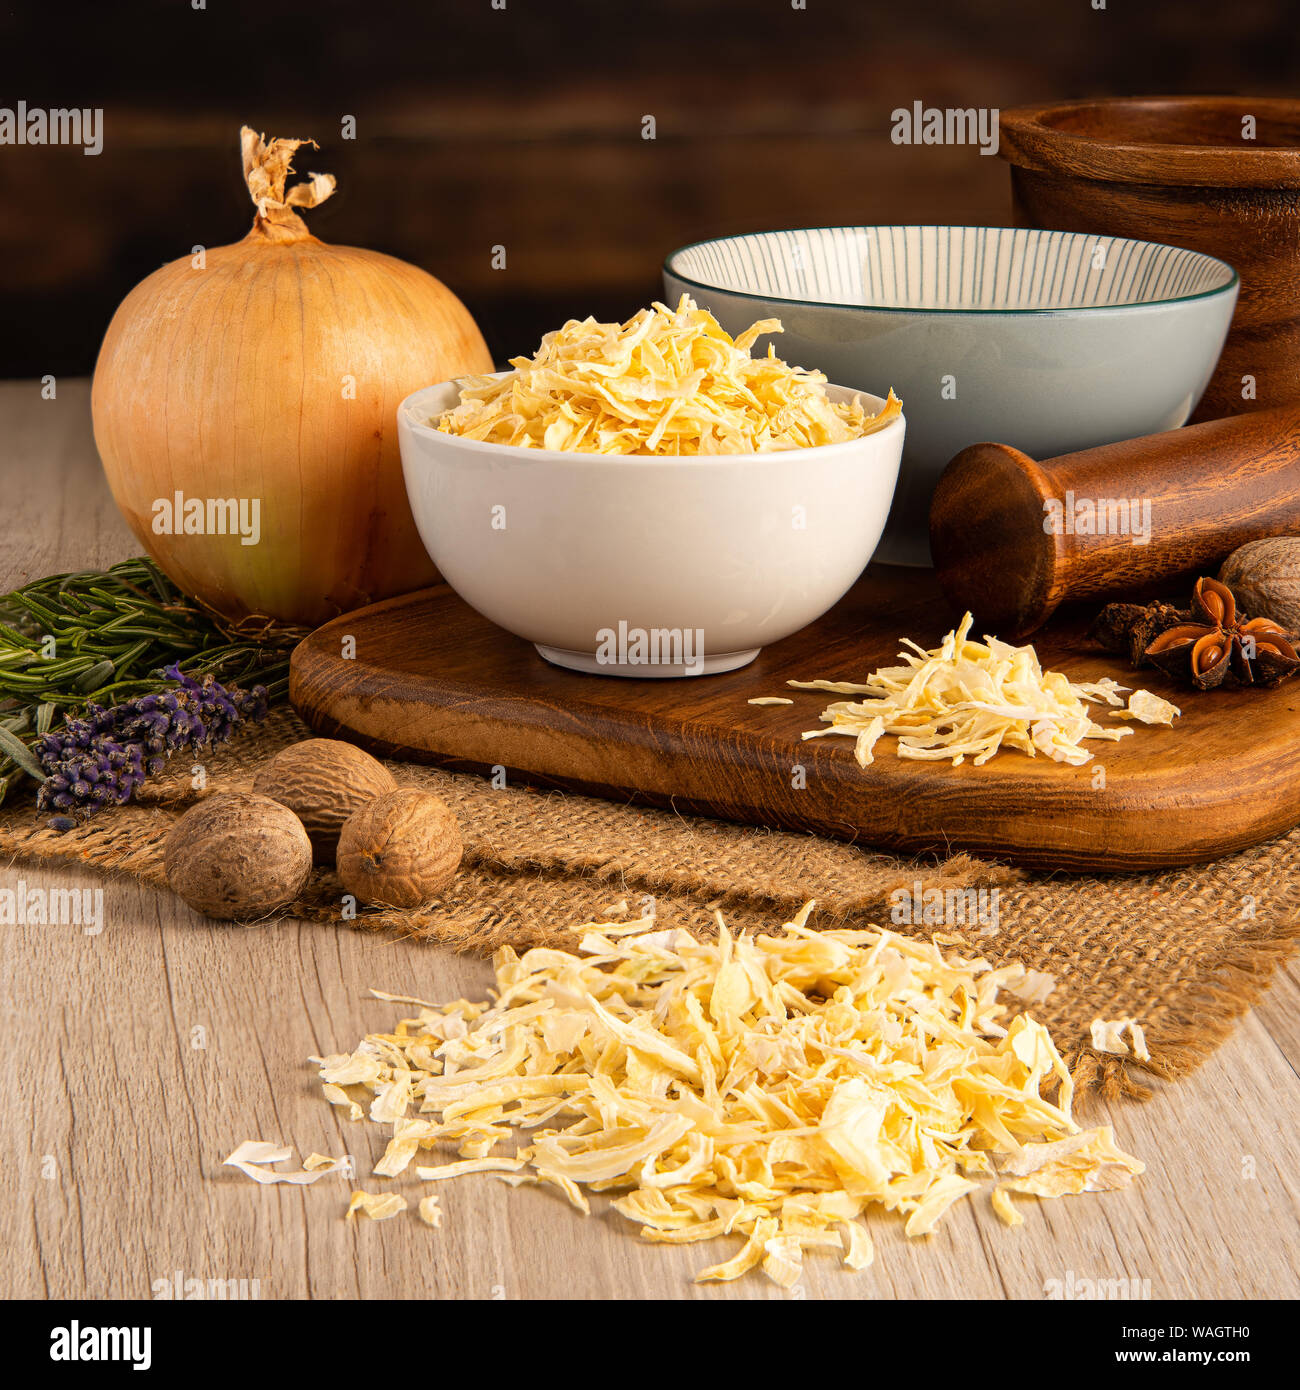 Dry Kibbled Onions in a bowl and food preparation and kitchen setting Stock Photo